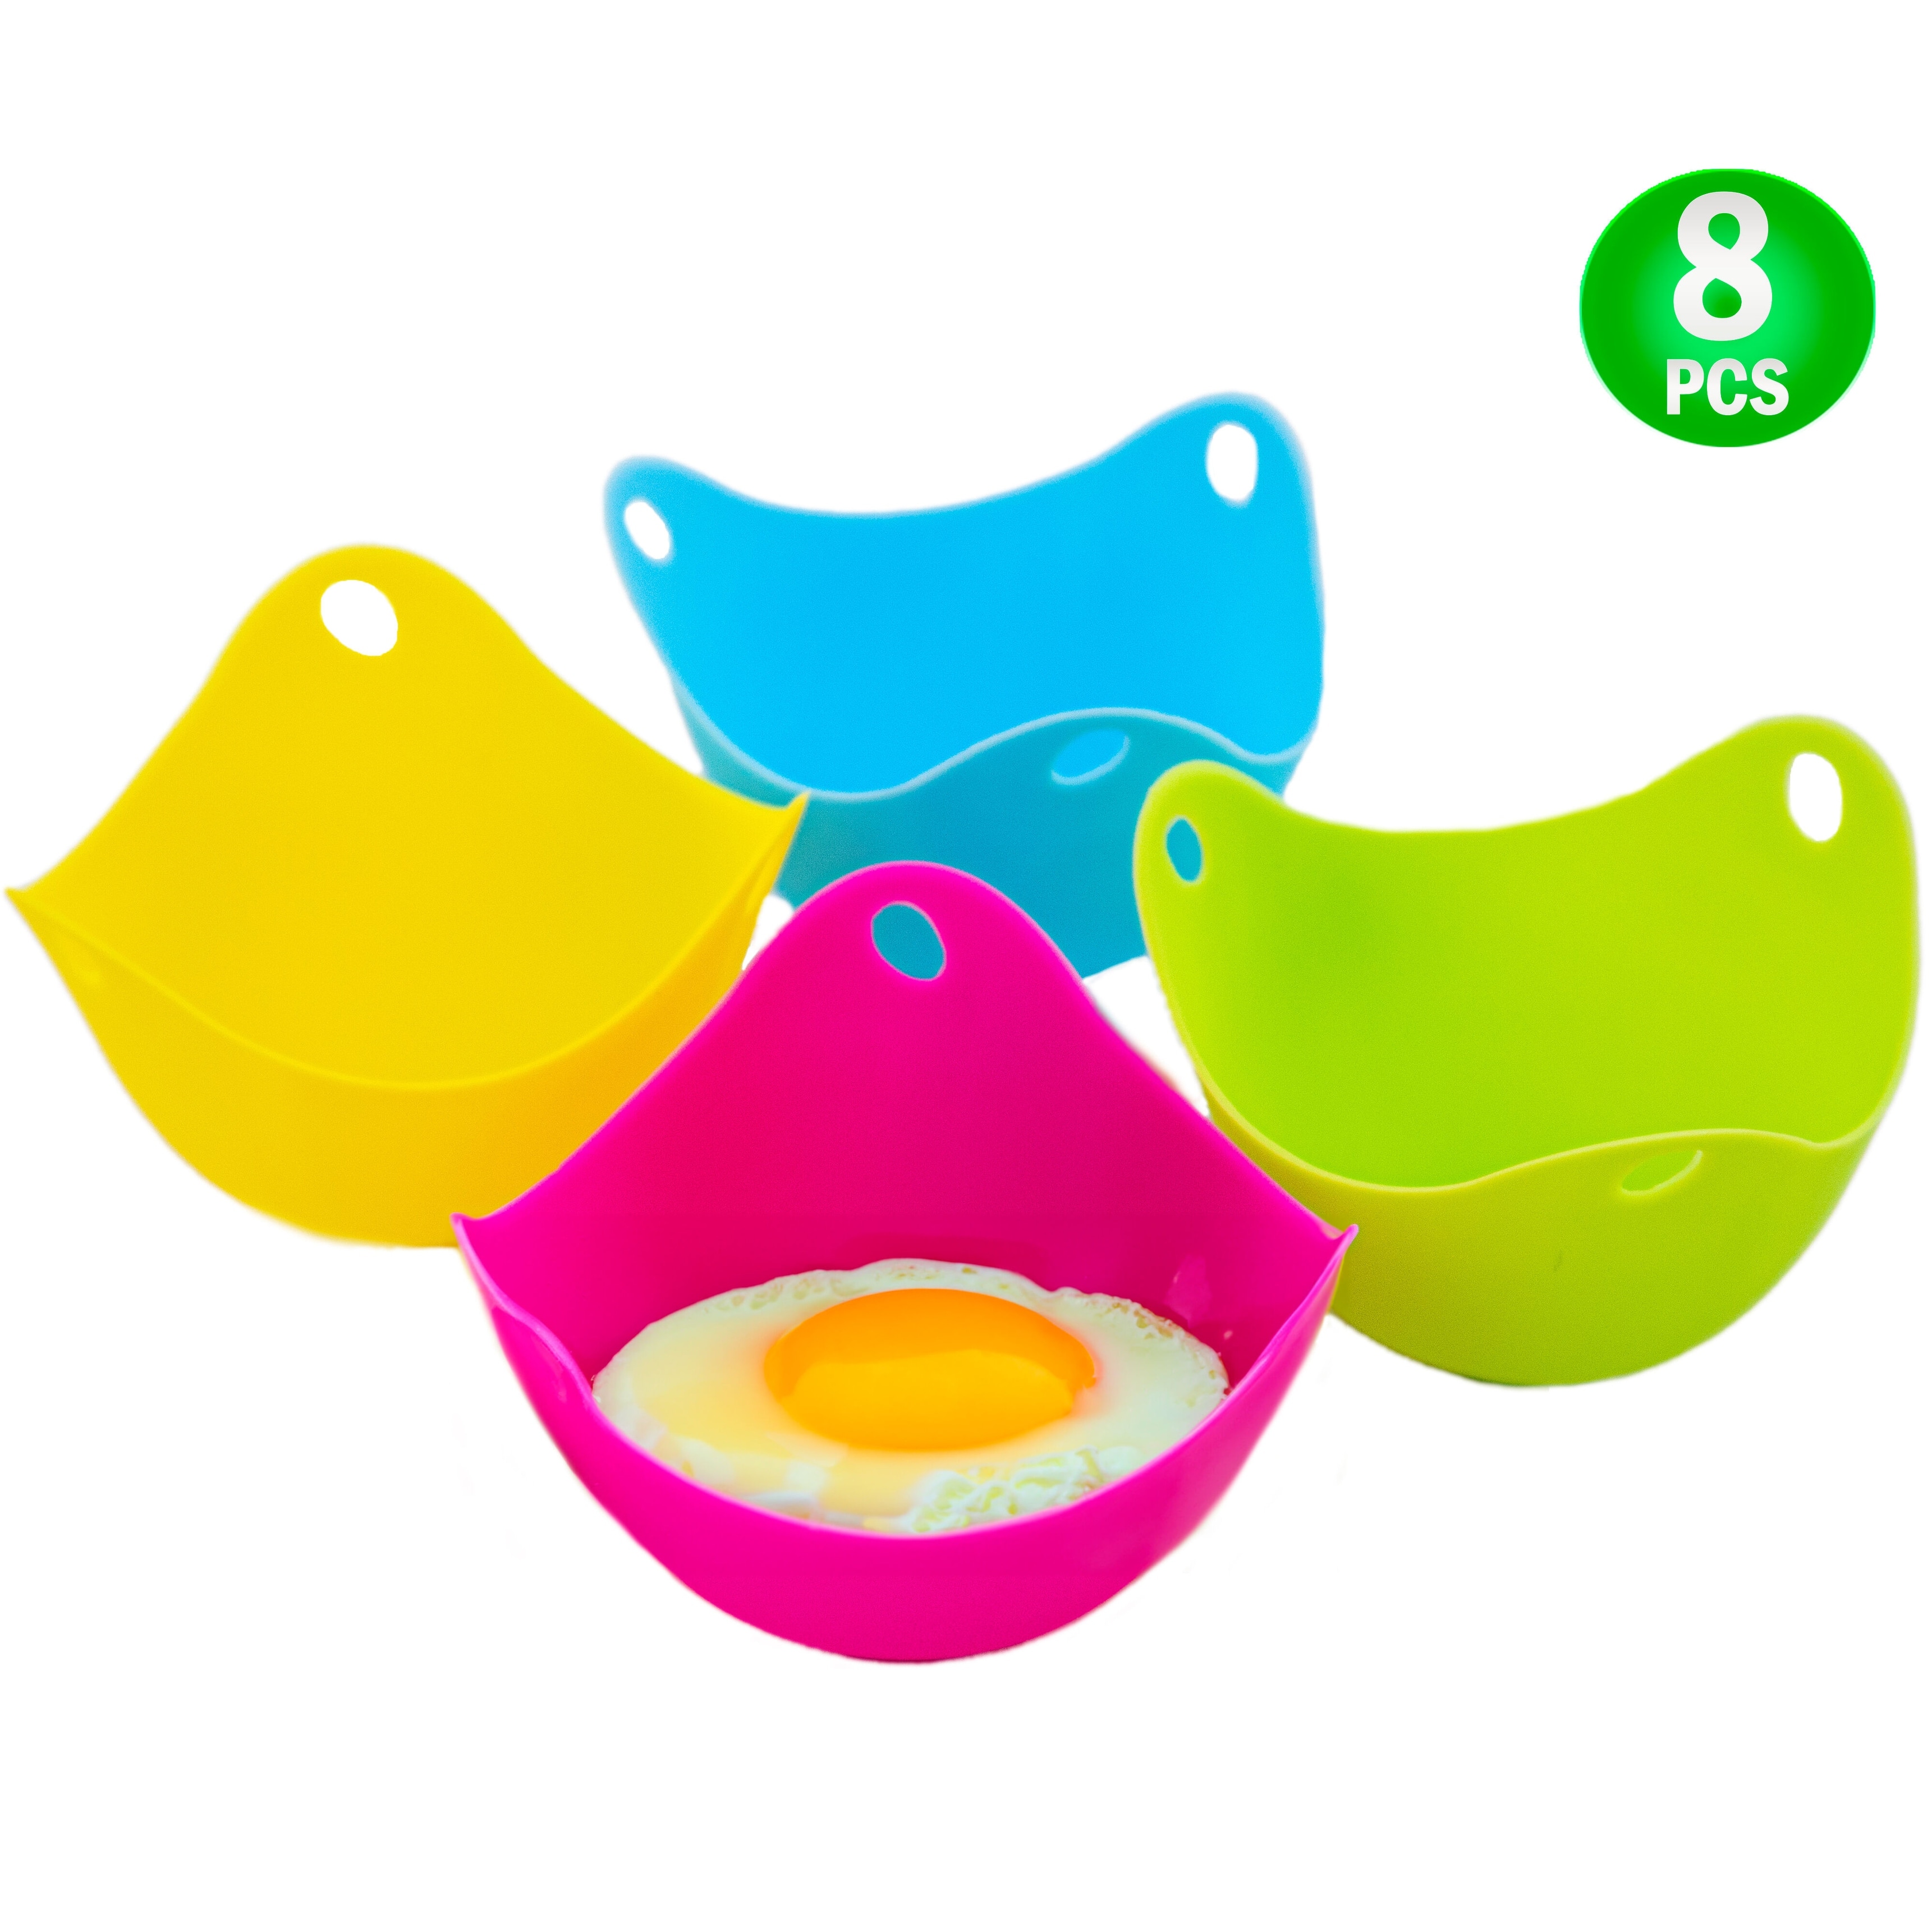 Non-stick Silicone Egg Poachers For Microwave, Air Fryer, Stovetop